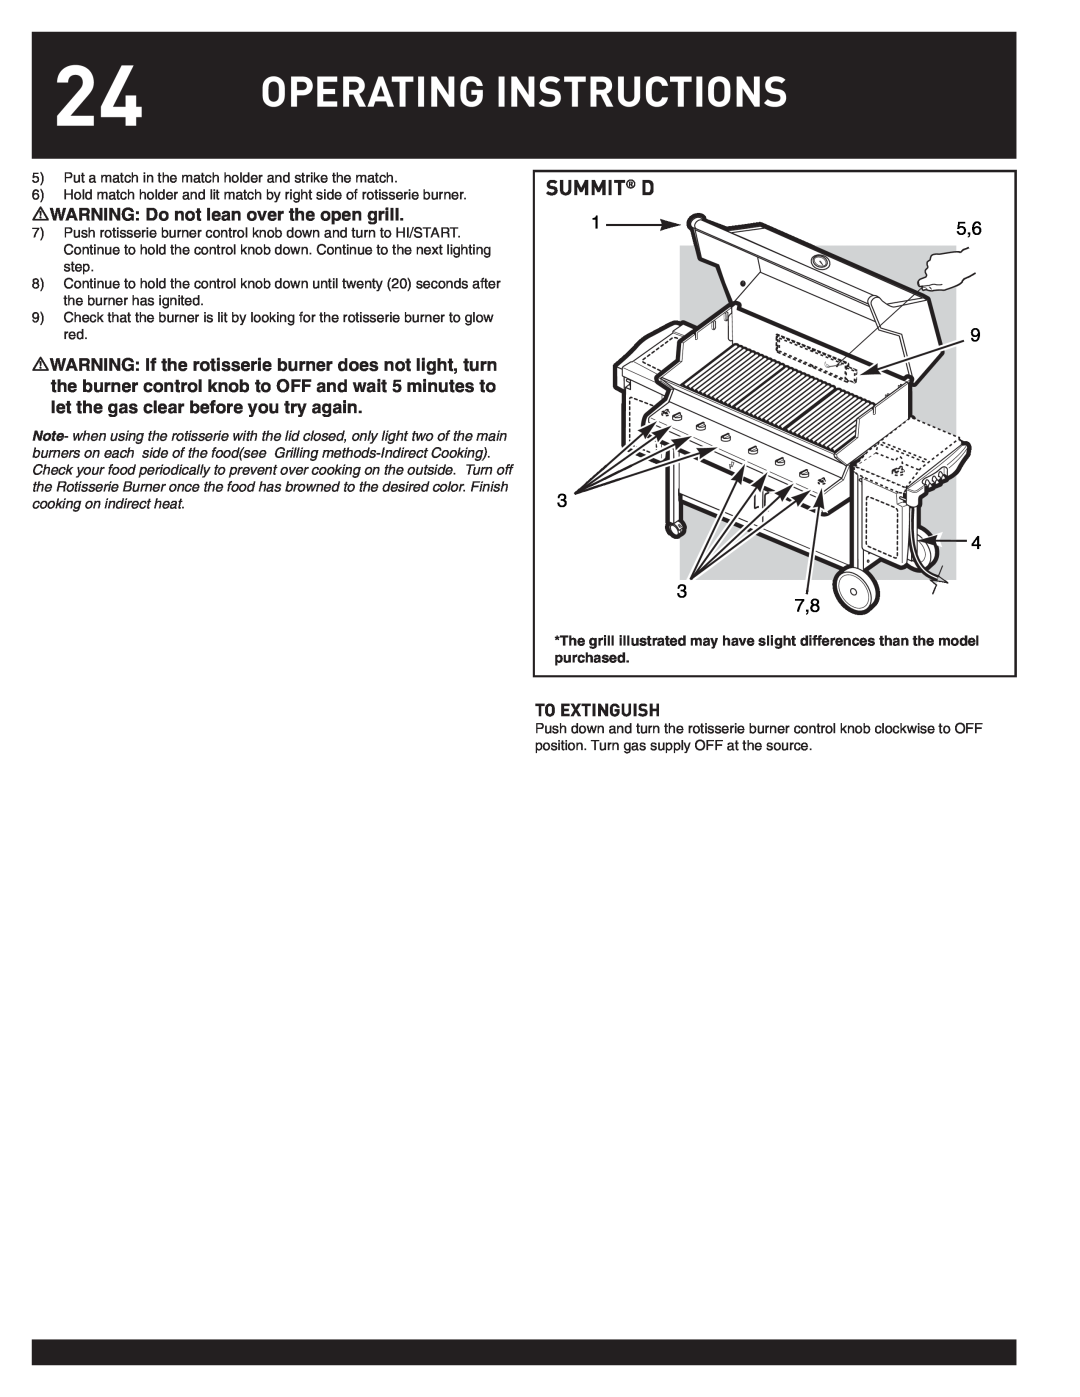 Weber SUMMIT manual Operating Instructions, Summit D, 3 7,8, WARNING Do not lean over the open grill, To Extinguish 